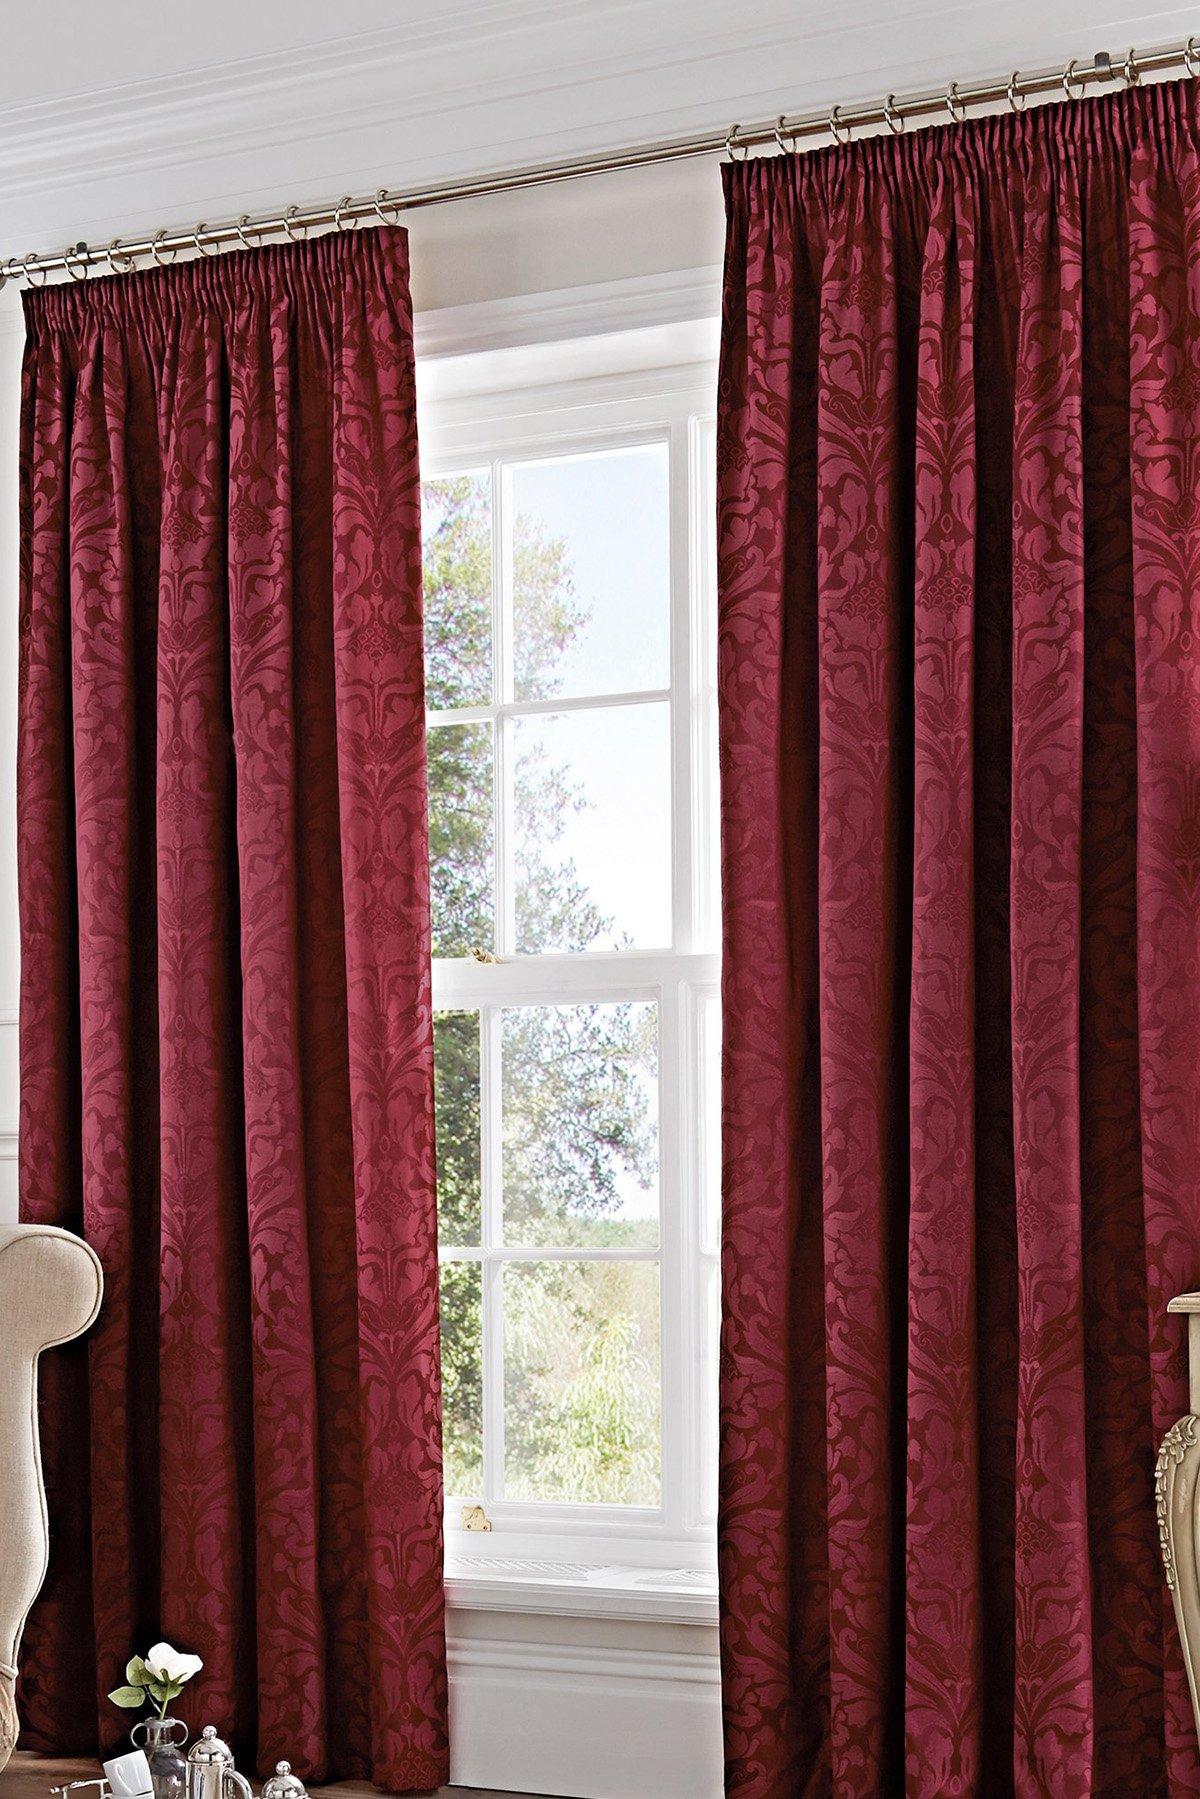 Dreams & Drapes Woven Eastbourne Pencil Pleat Lined Curtains|229x183cm(90x72inches)